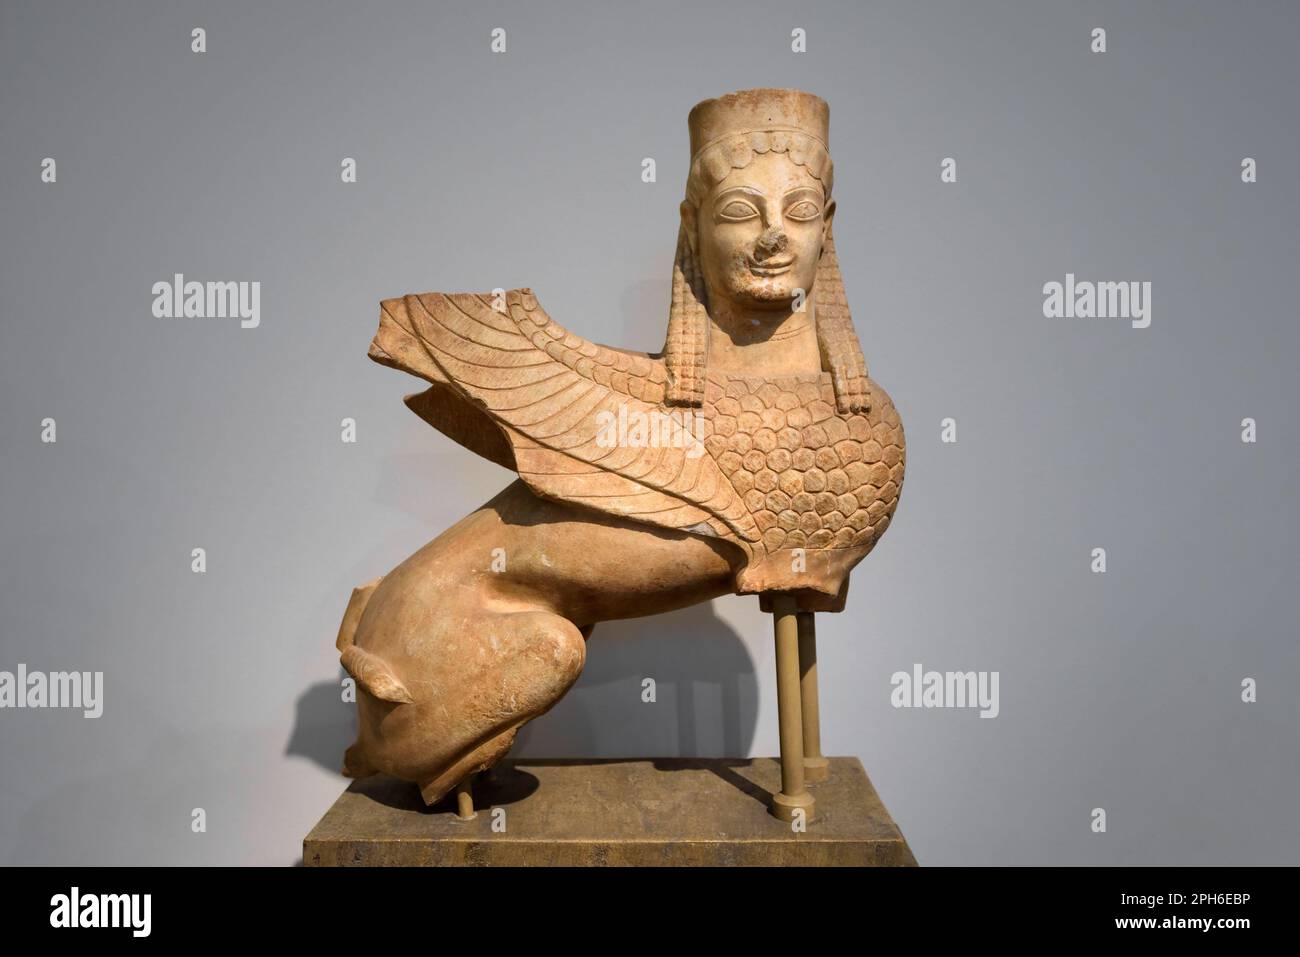 Athens - May 7, 2018: Stone statue of sphinx in Archaeological Museum, Athens, Greece. Concept of Ancient Greek and Egypt history, artifact, antiquity Stock Photo